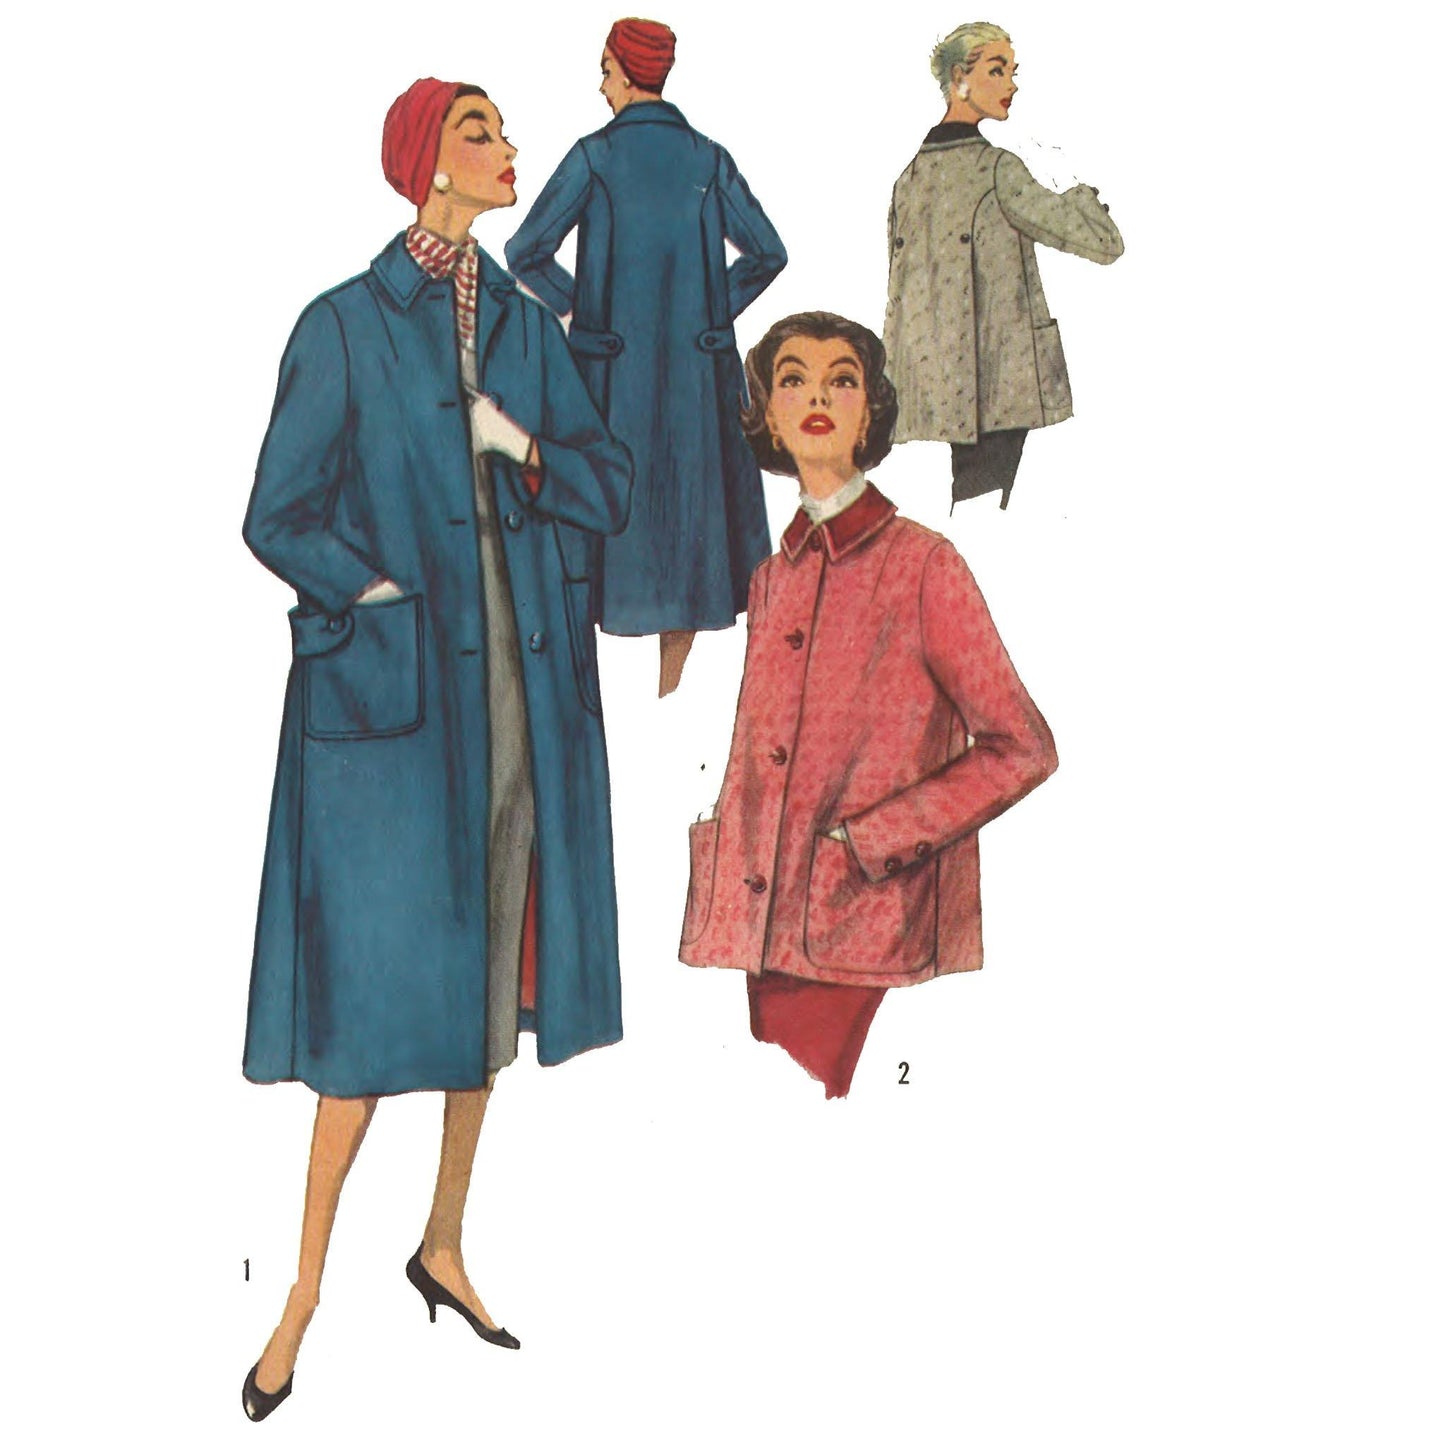 Women wearing a coat and a jacket, front and back views.